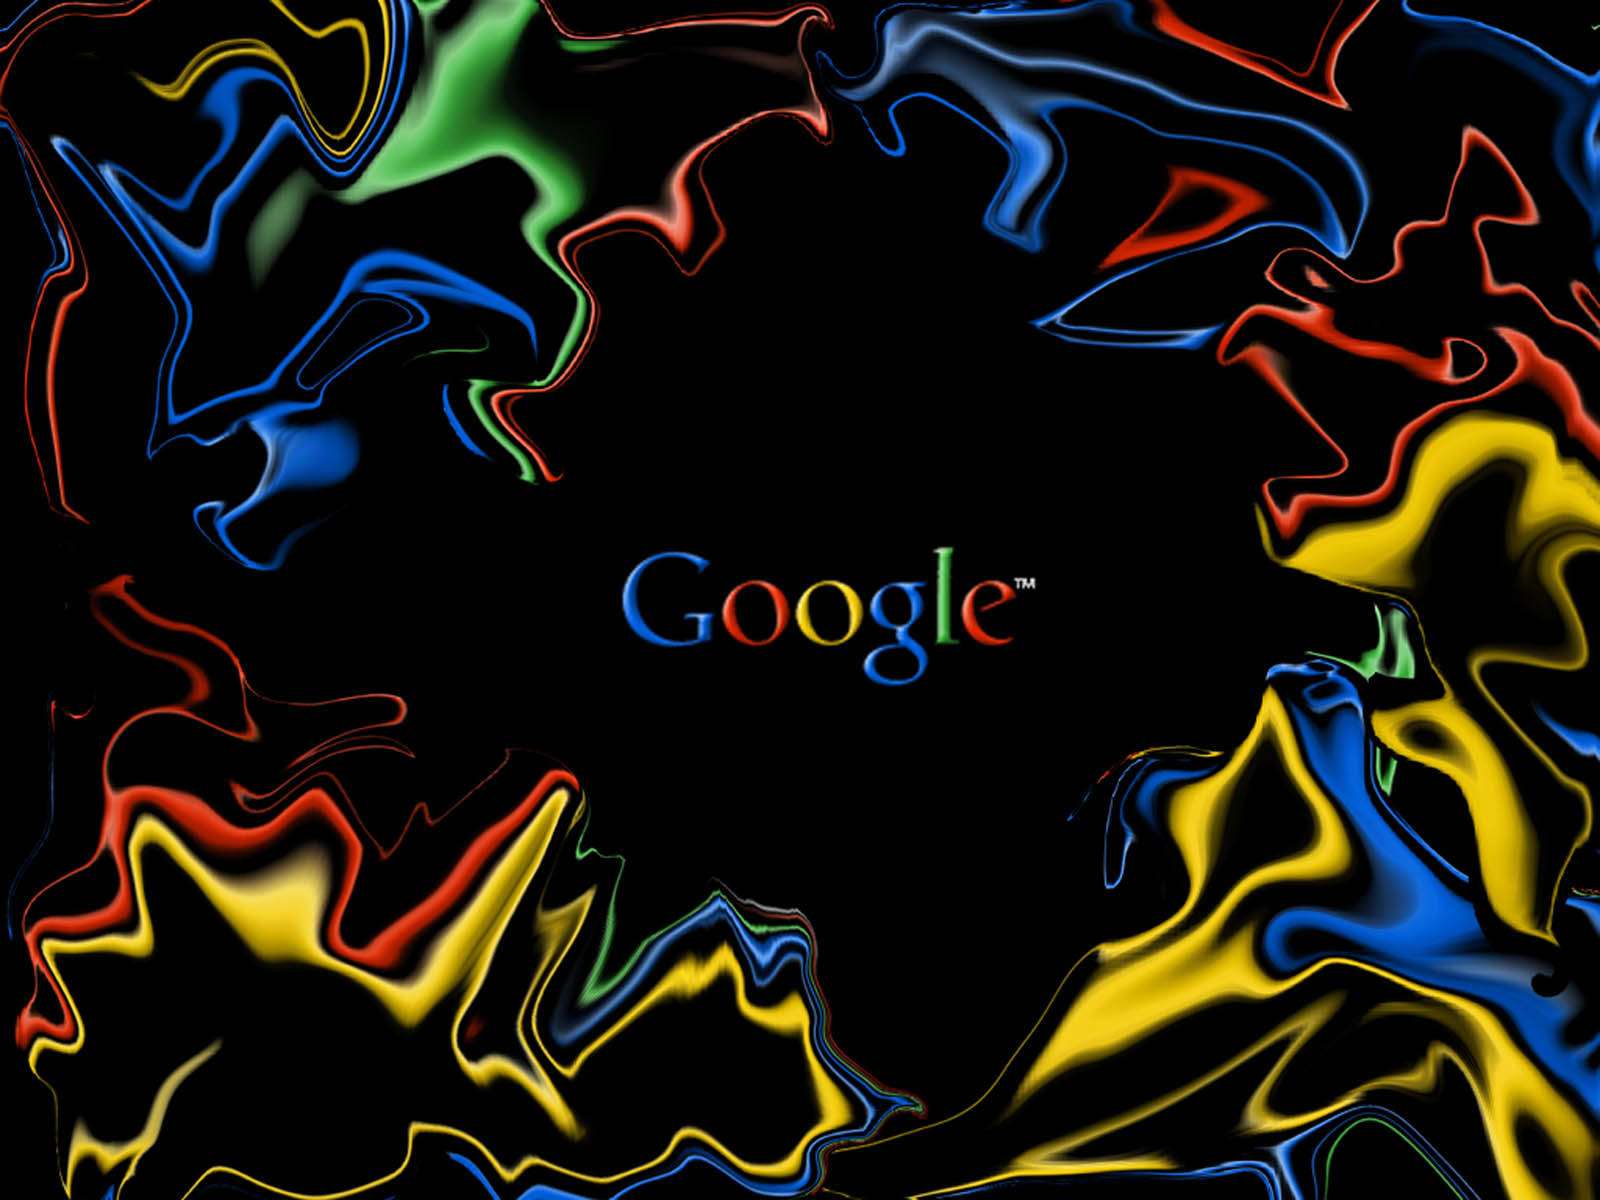 Google Colorful Waves